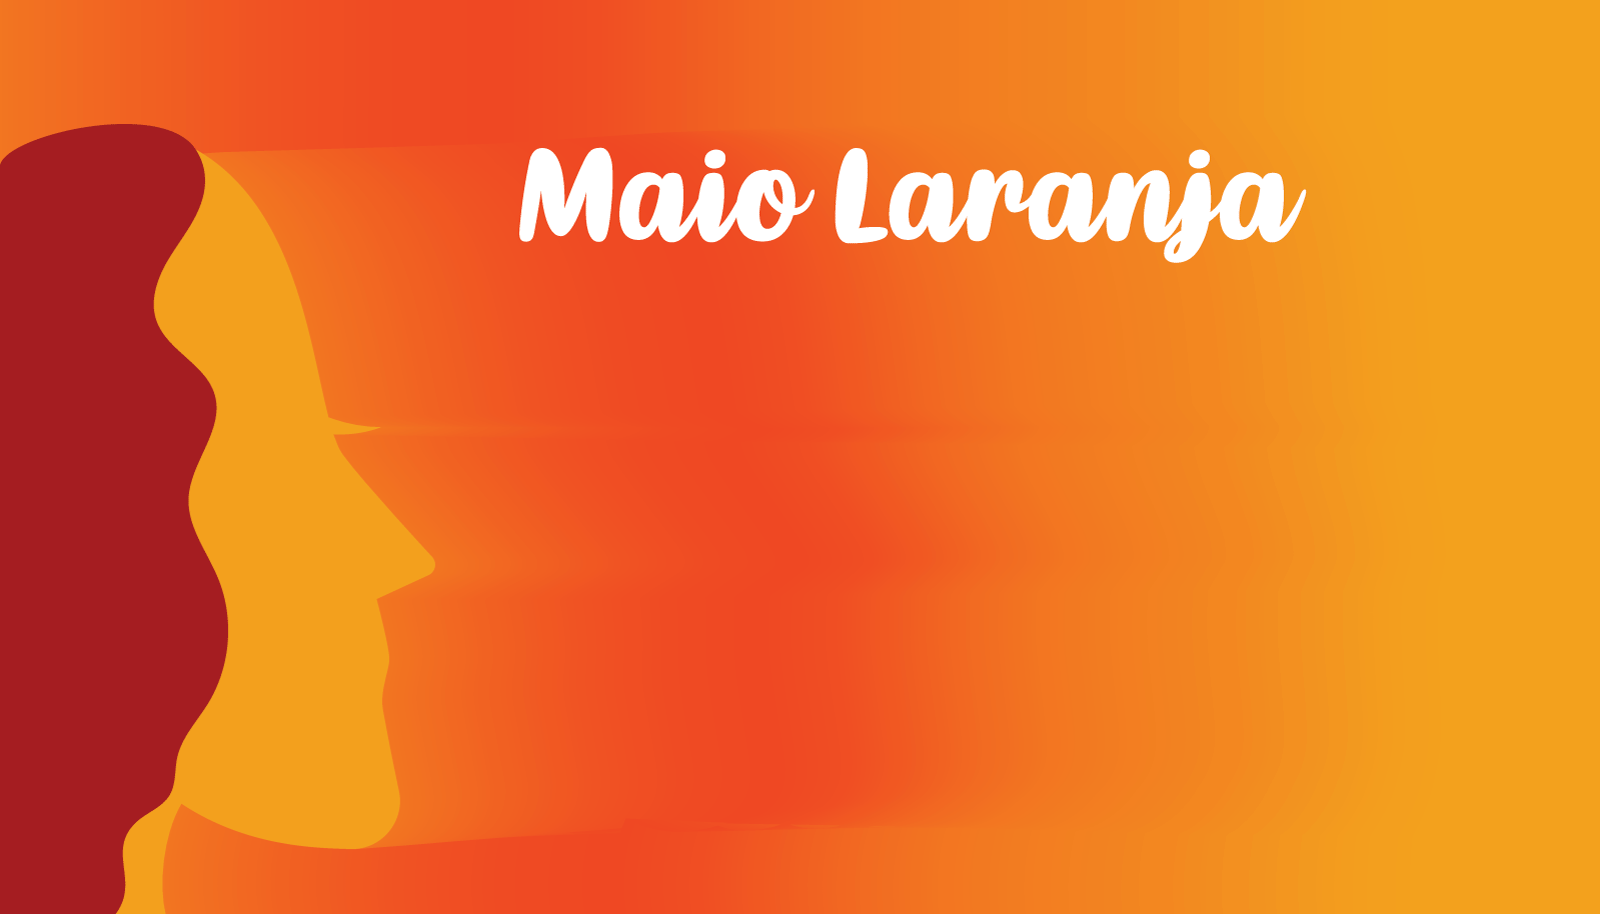 Maio Laranja background Maio laranja campaign against violence research of children 18 may template